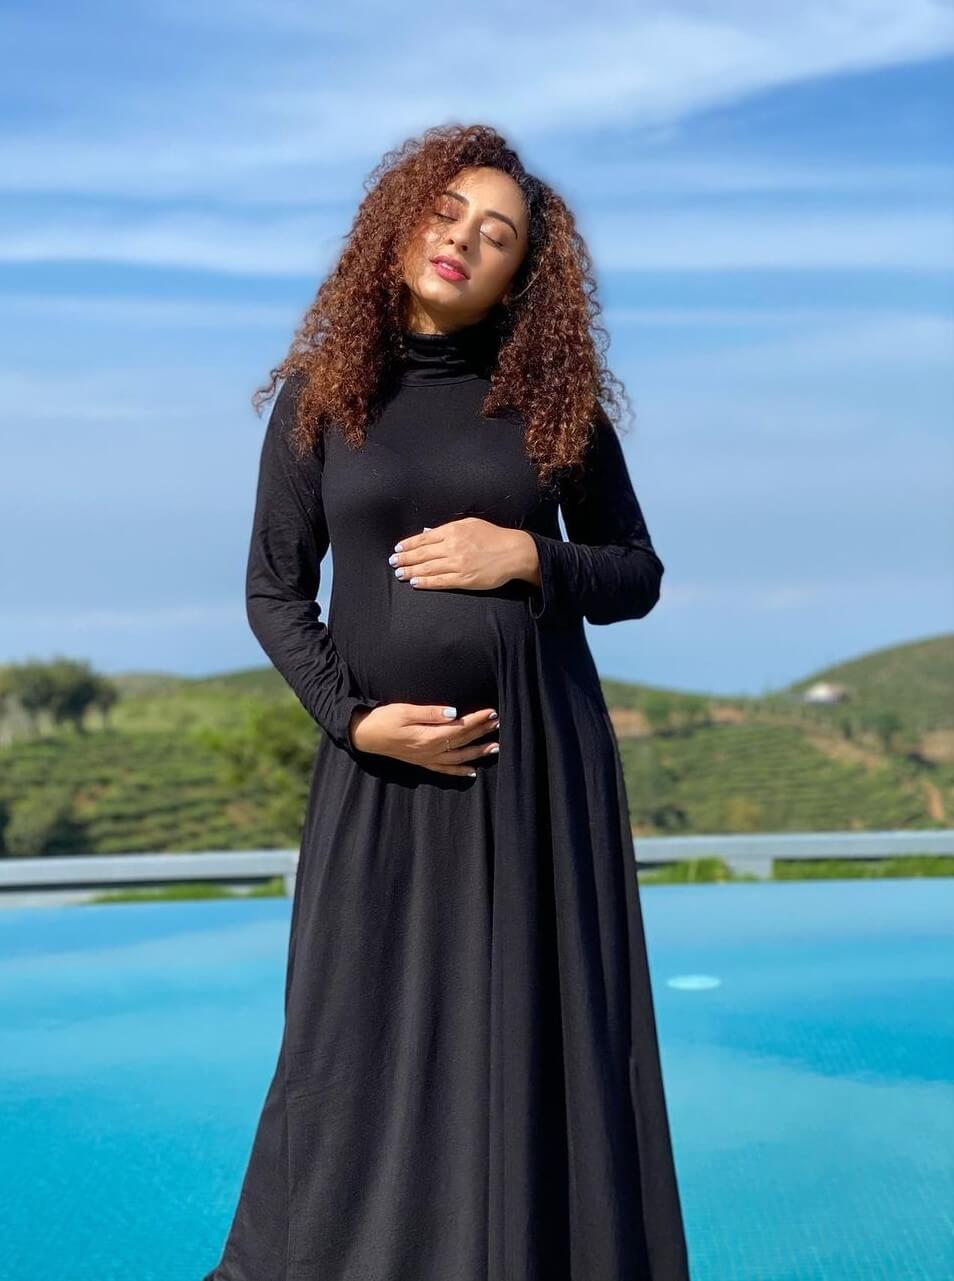 Pearle Maaney  Slayed The Back High Neck Long Maxi Maternity Dress